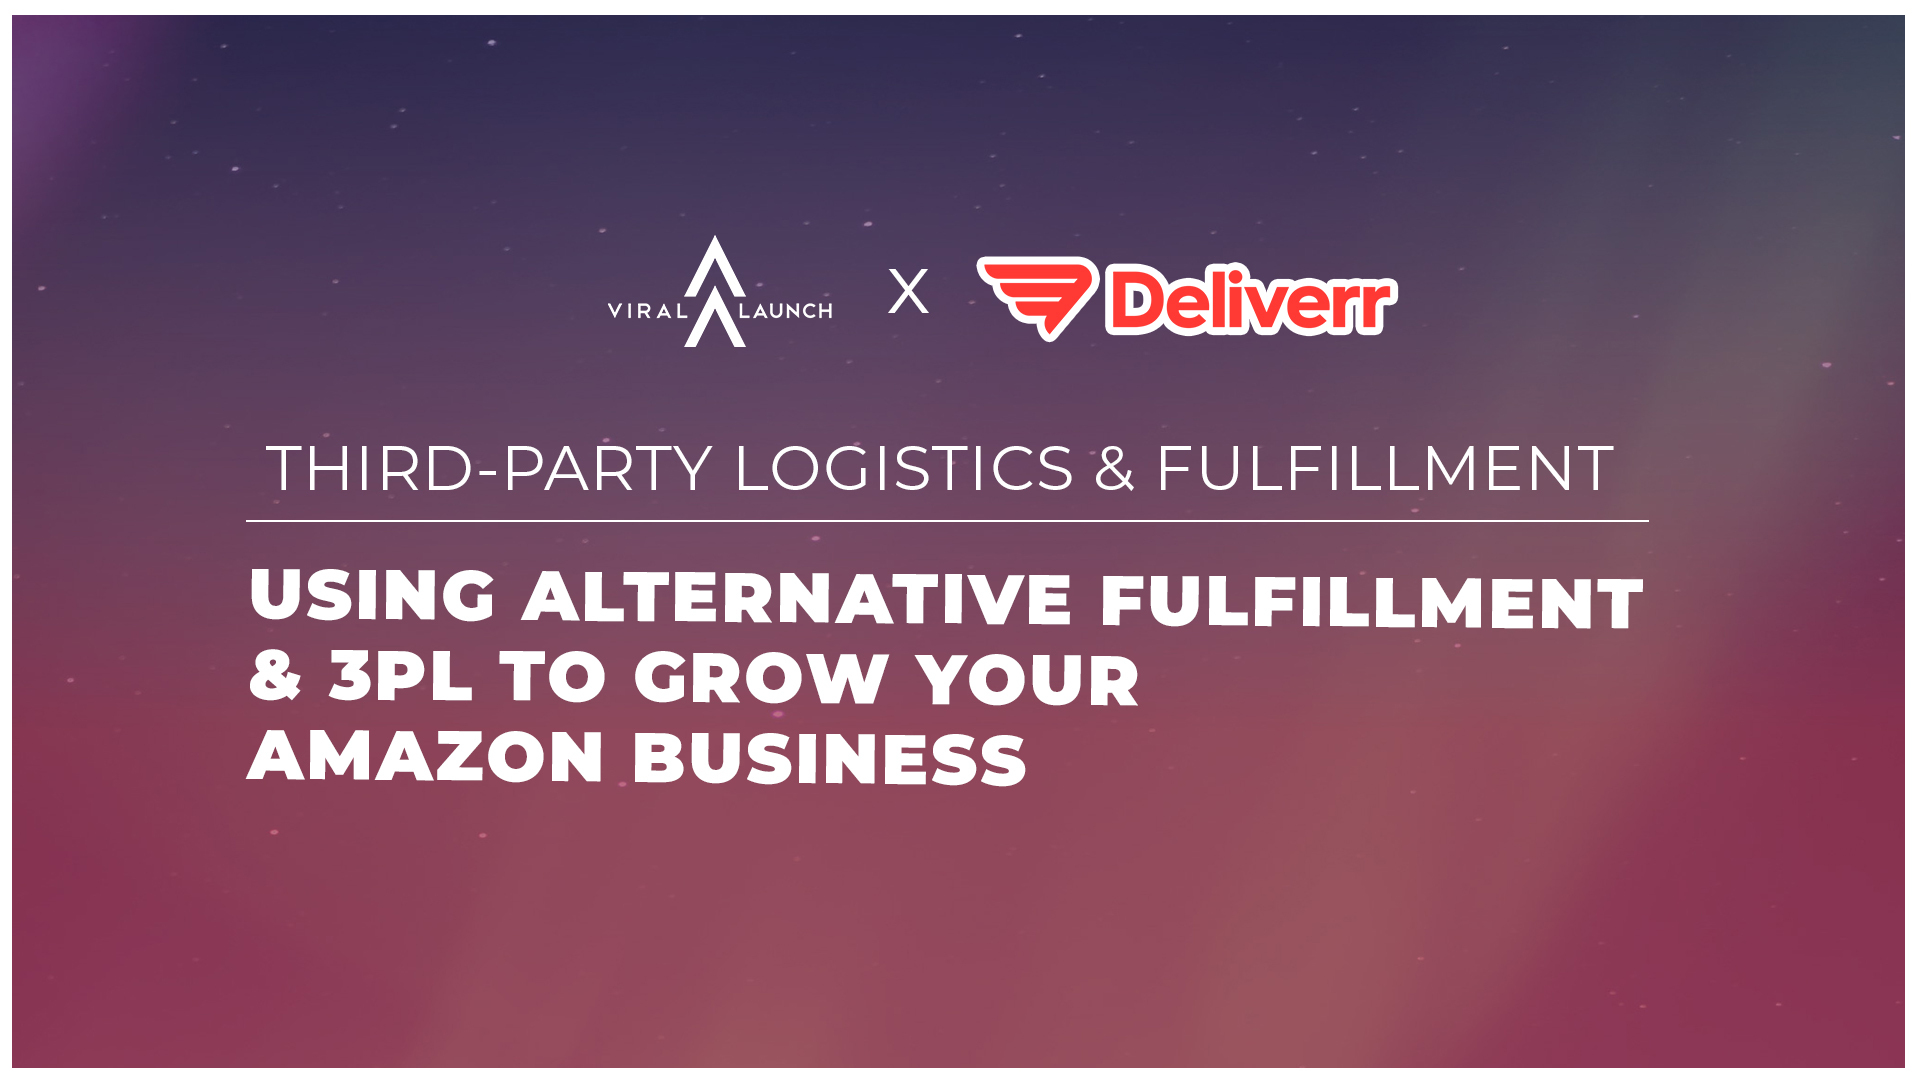 Deliverr x Viral Launch graphic on third-party fulfillment fbm